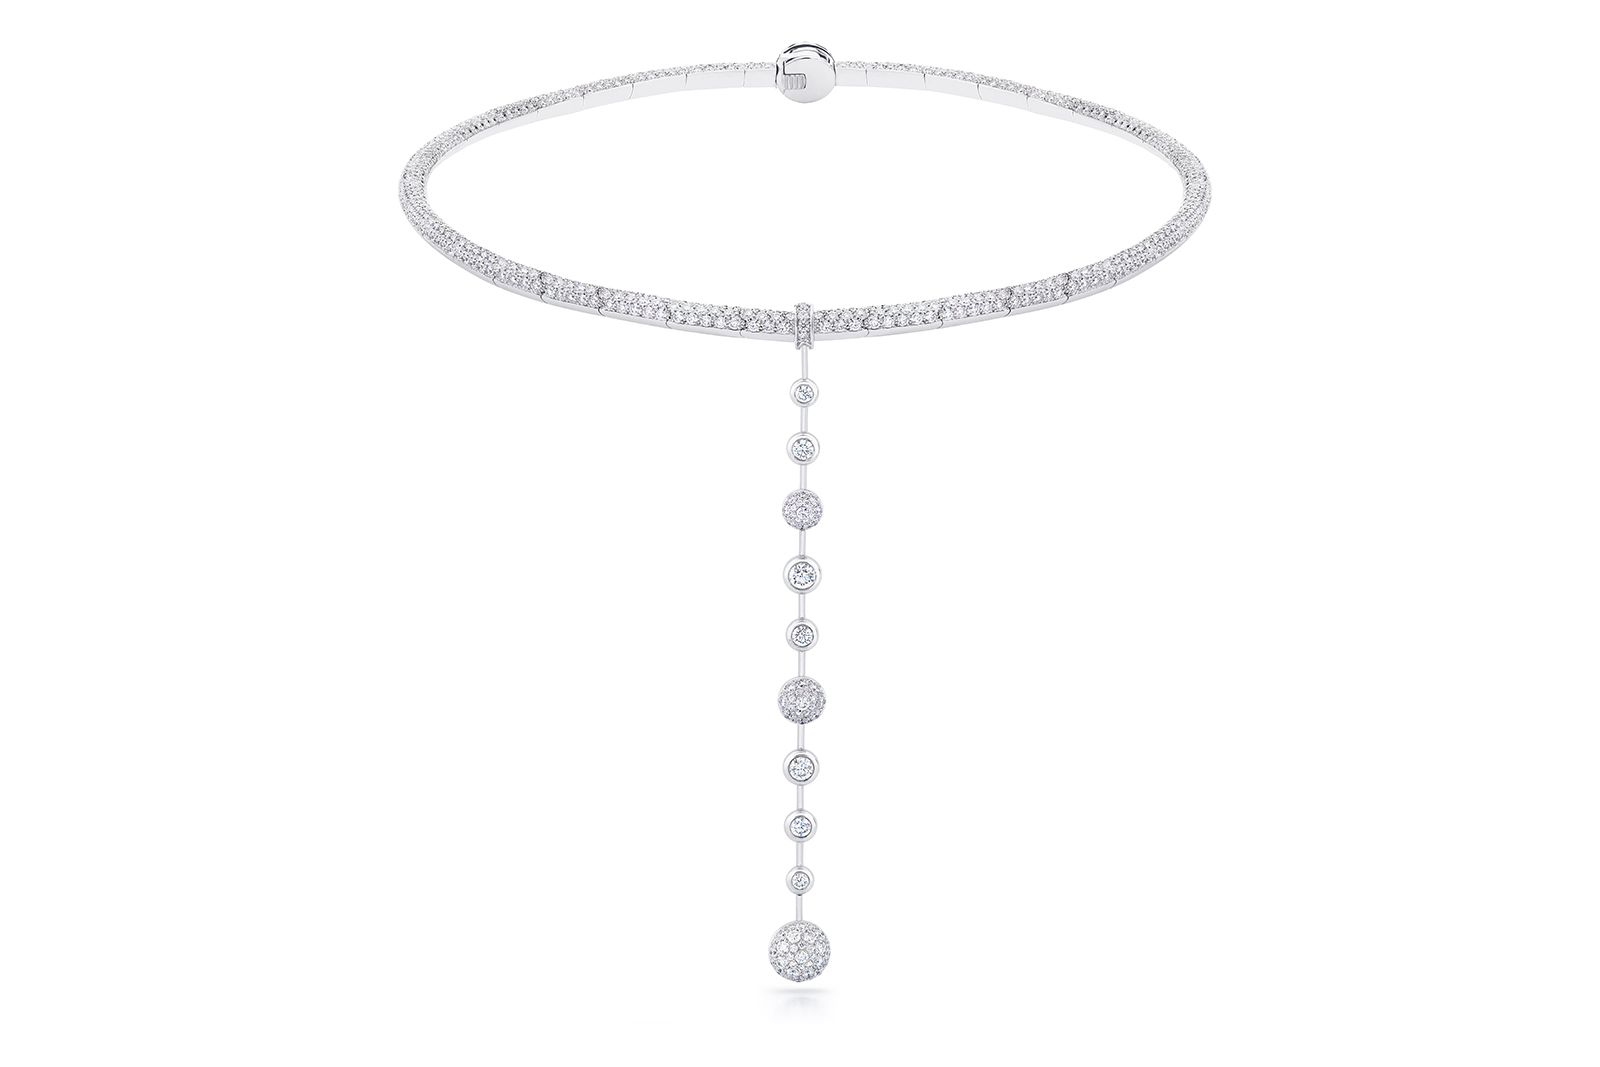 De Beers Jewellers The Alchemist of Light High Jewellery Atomique diamond pavé choker with a line of diamonds that can be removed and attached to a stud earring